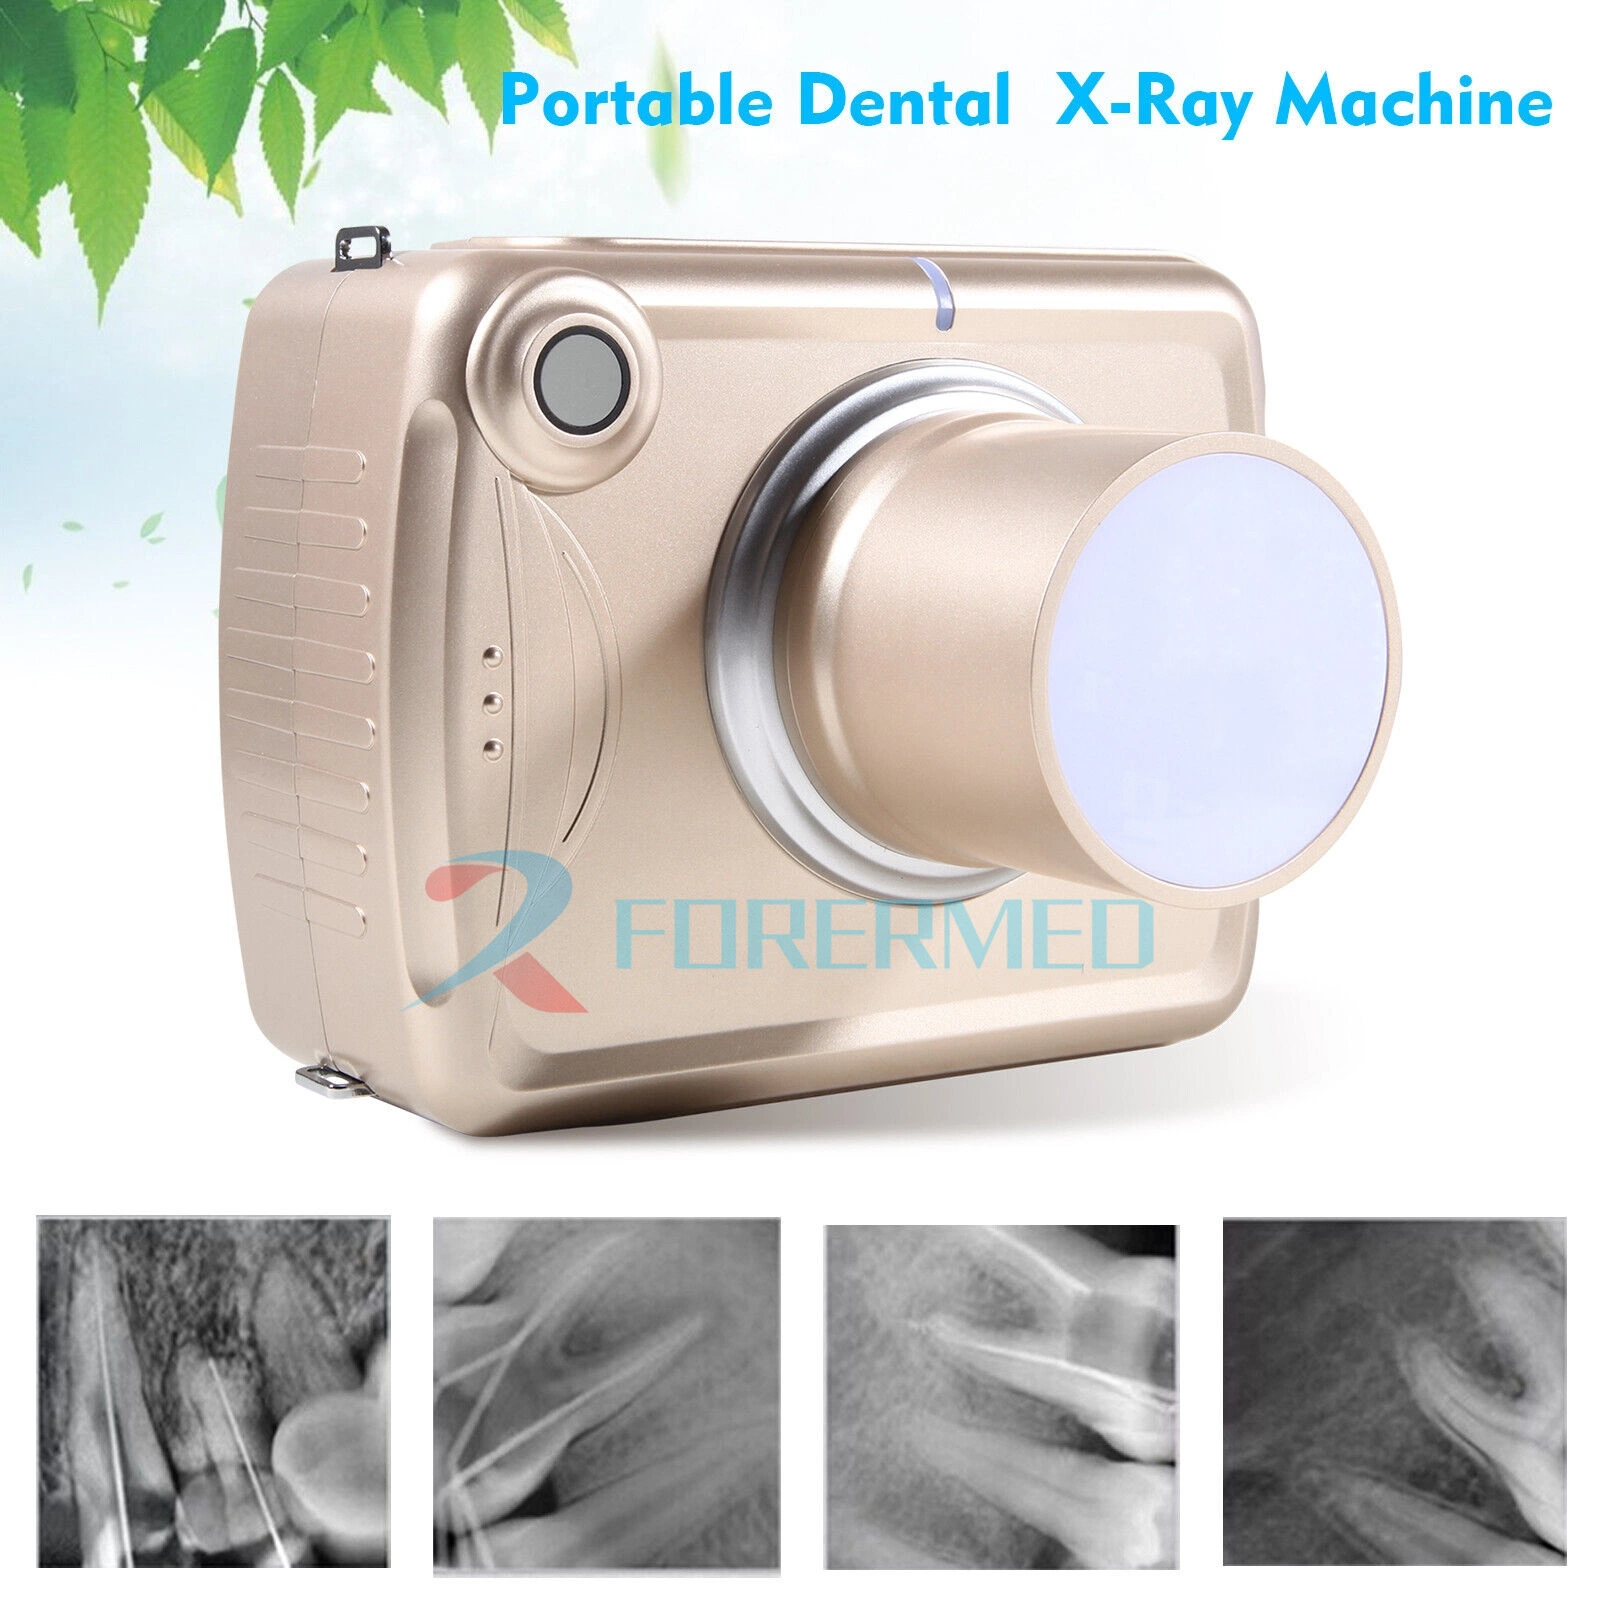 Dental Imaging System Portable Digital X-ray Machine Equipment High Frequency Yj-Dxp01